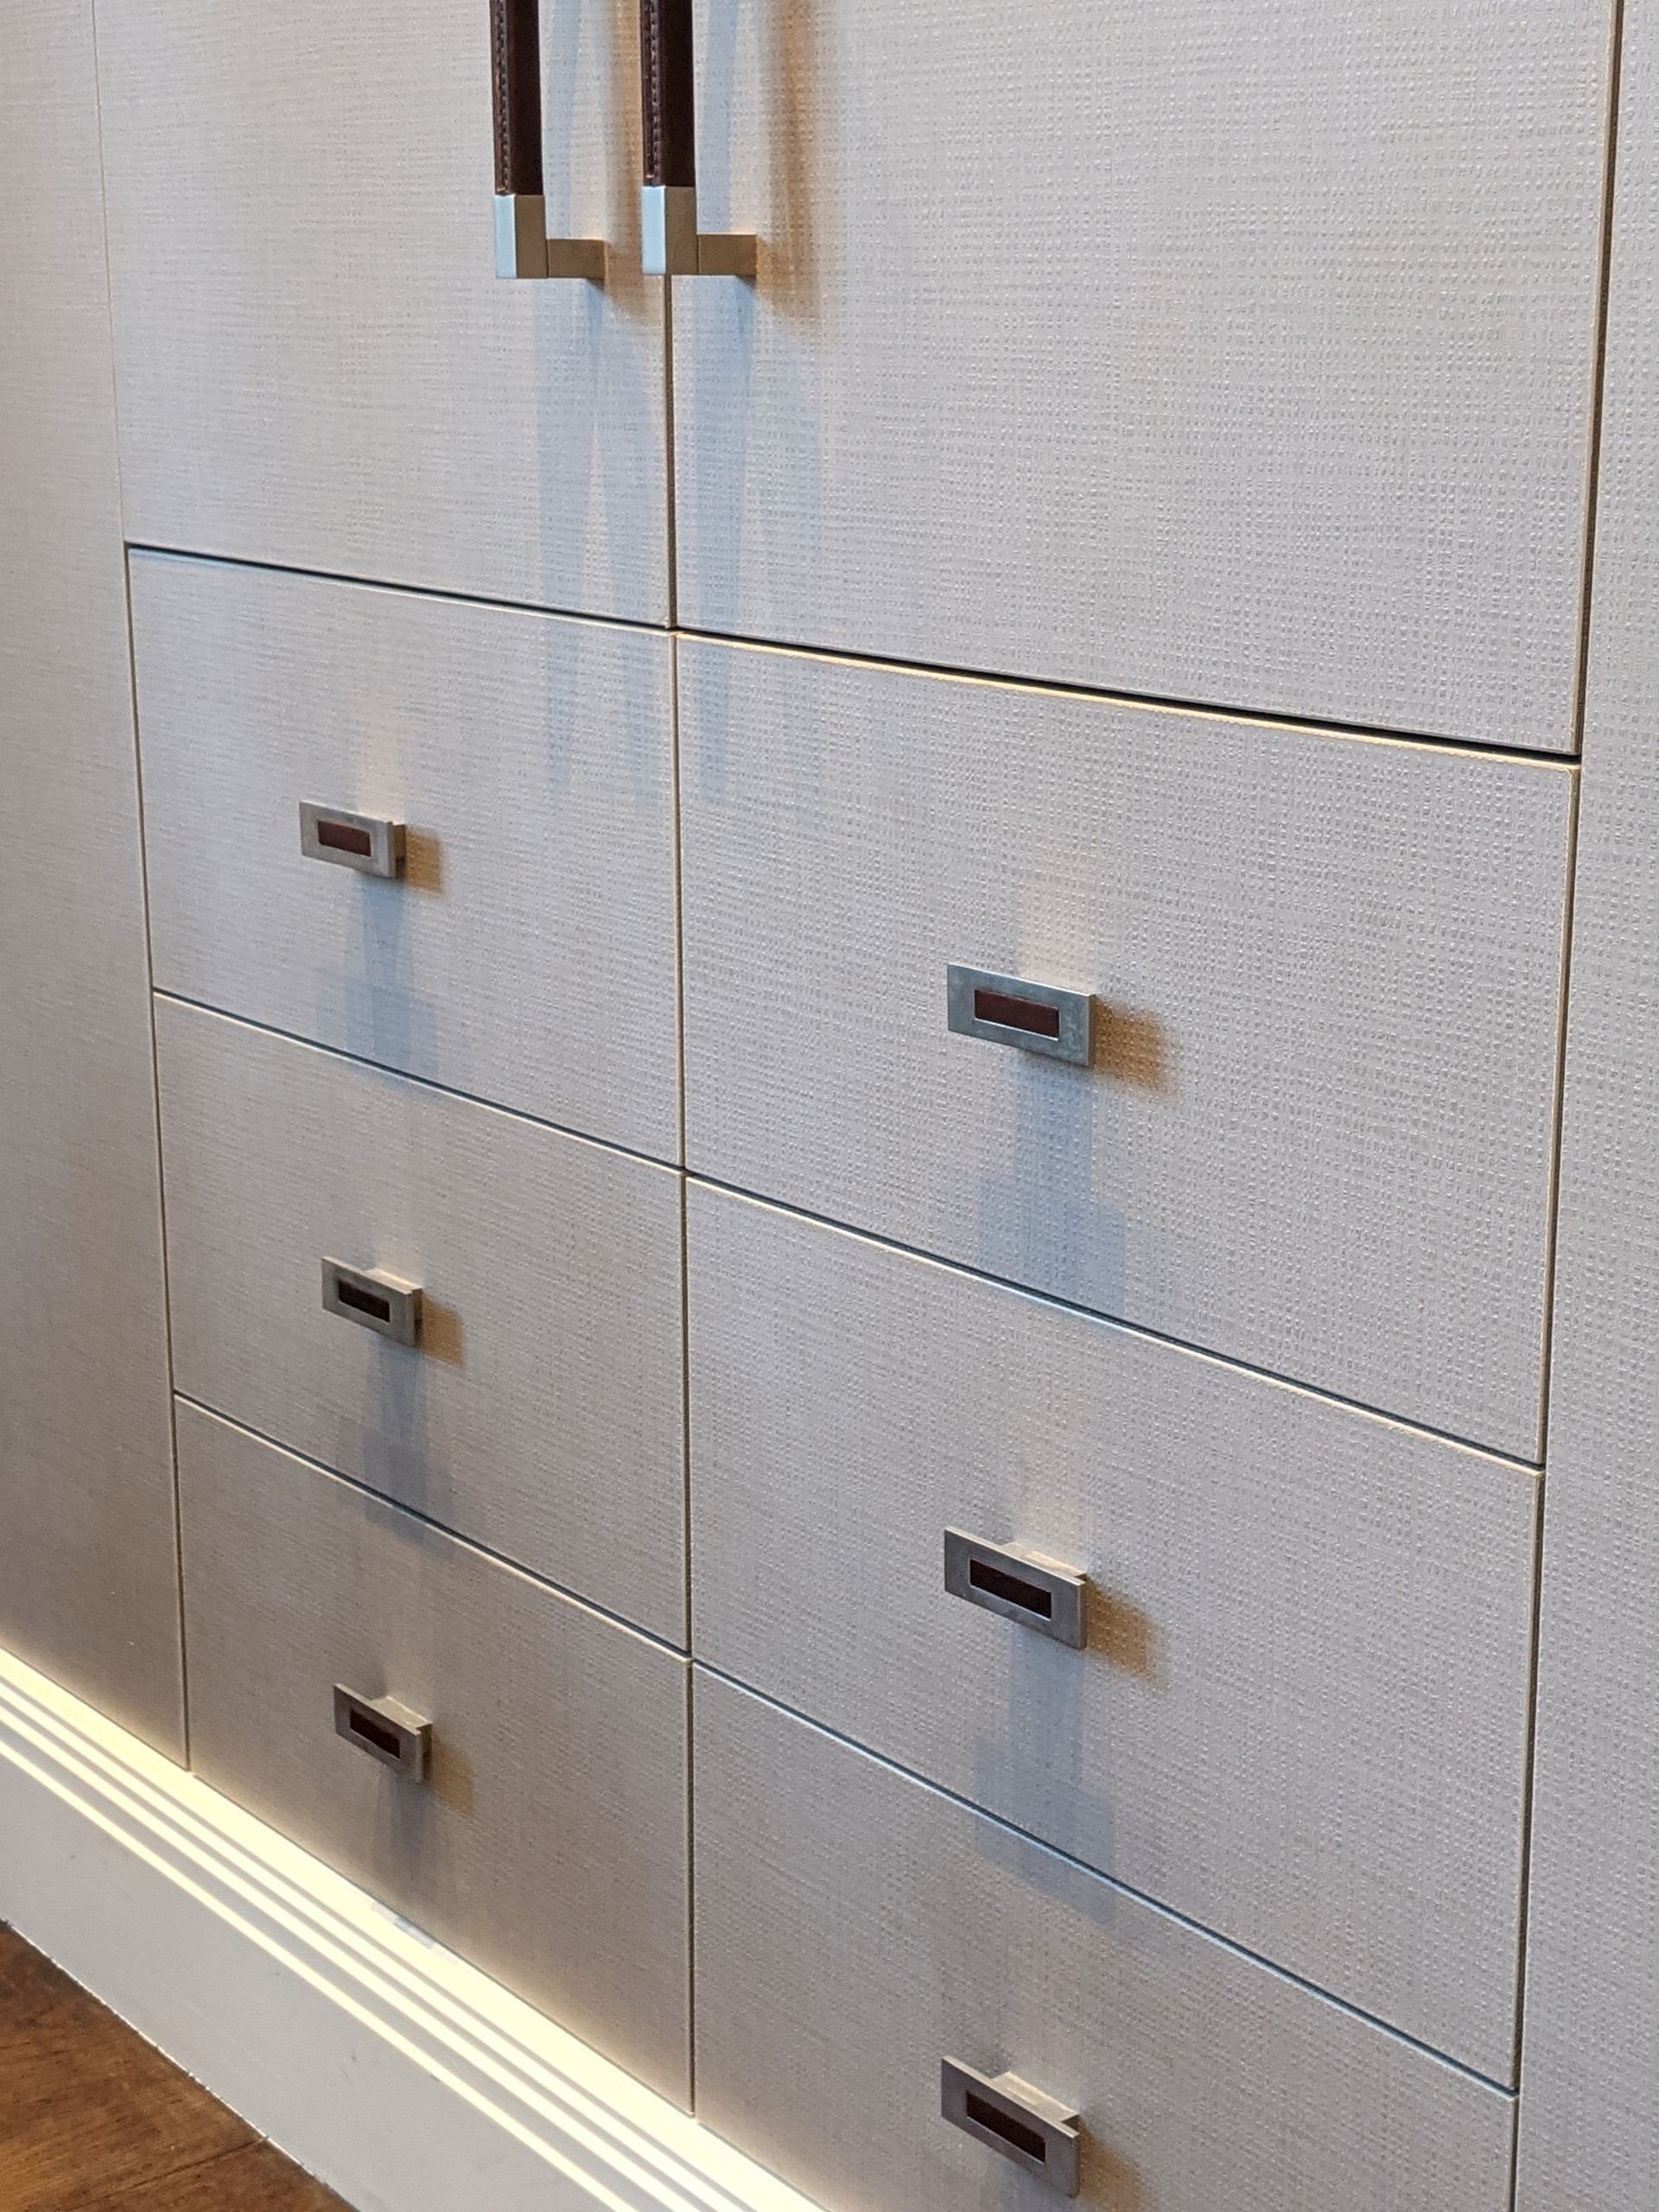 Bespoke Drawers in Fitted Wardrobes